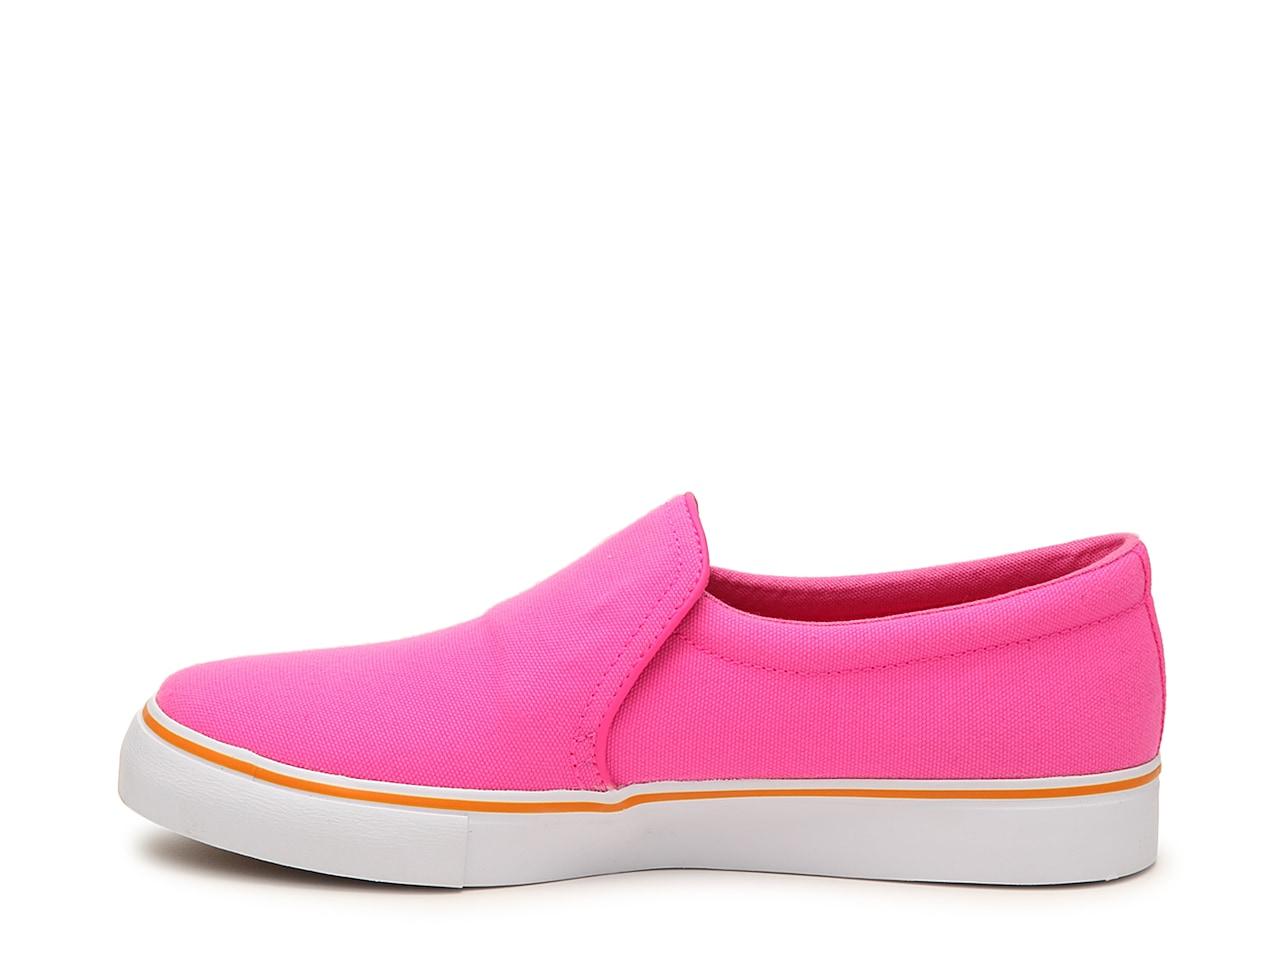 Nike Canvas Court Royale Ac Slip-on Sneaker in Pink | Lyst